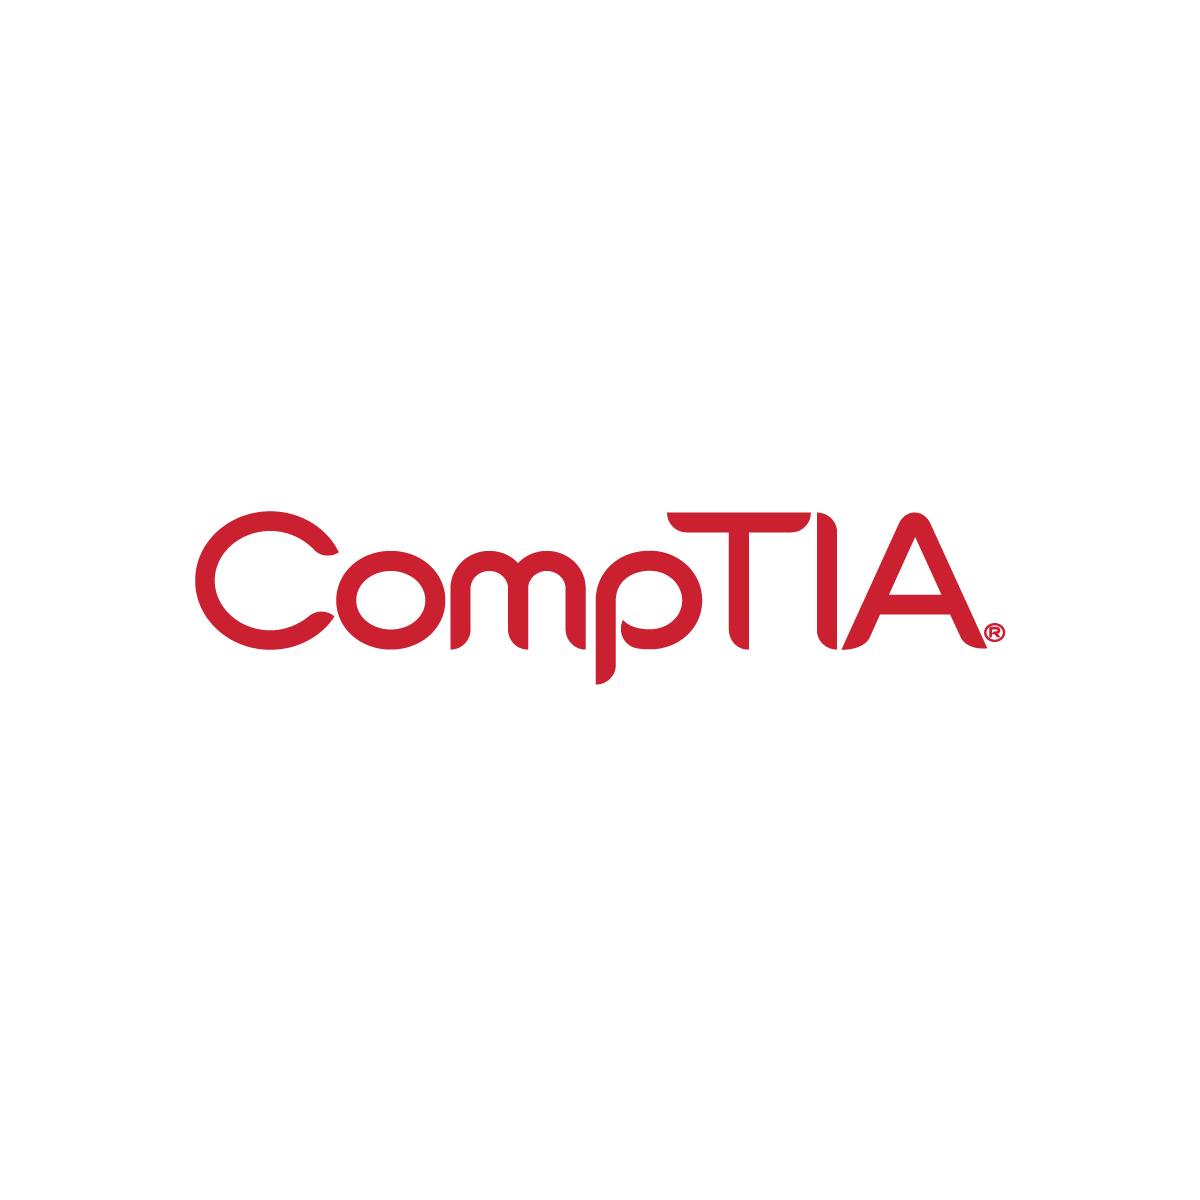 CompTIA Learning